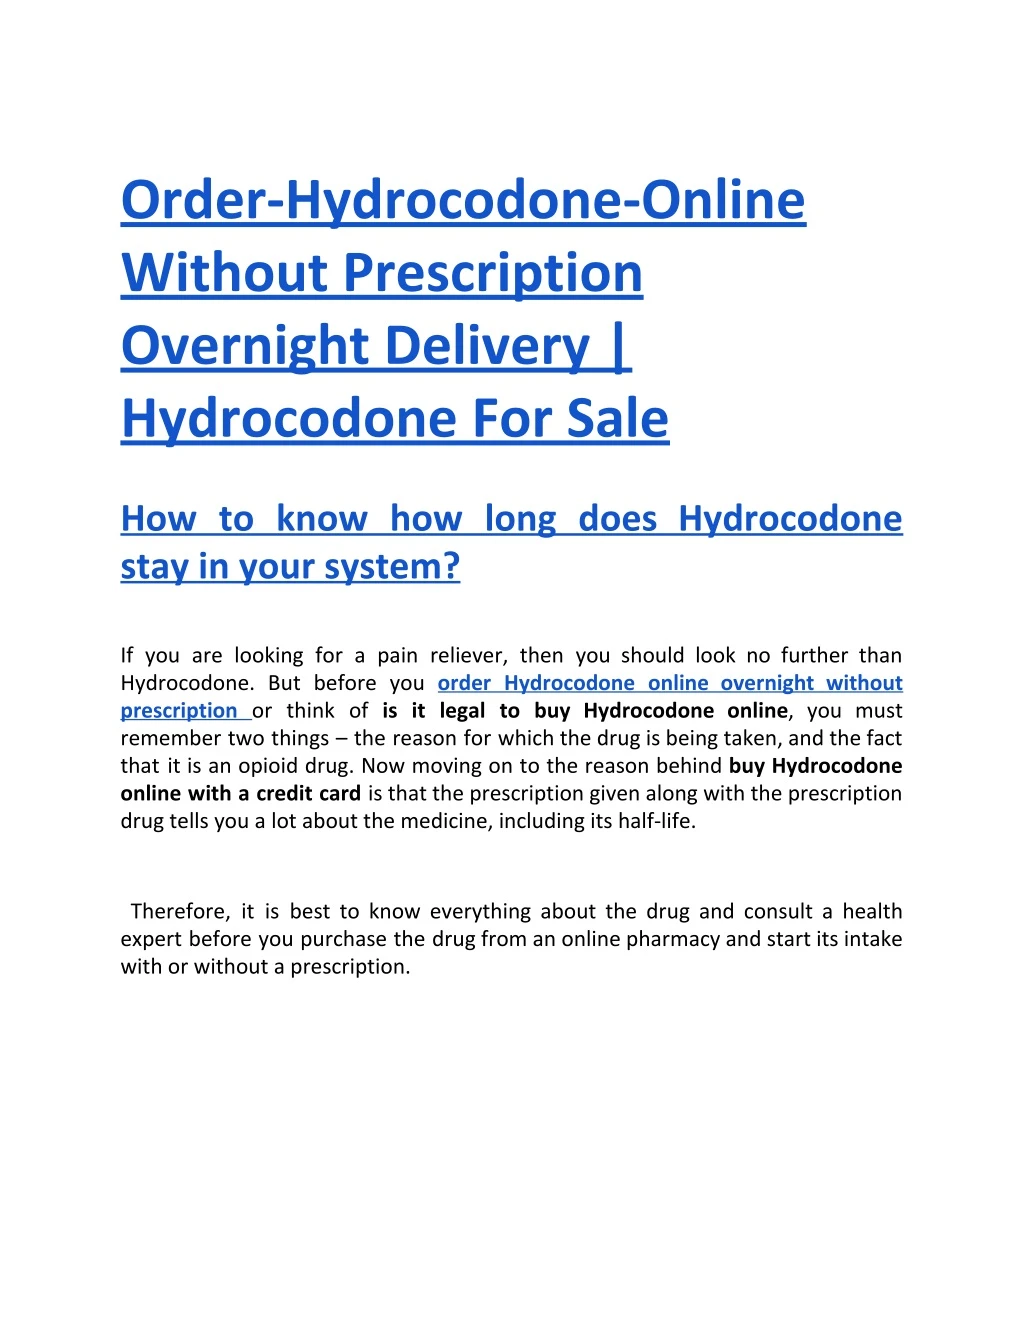 order hydrocodone online without prescription